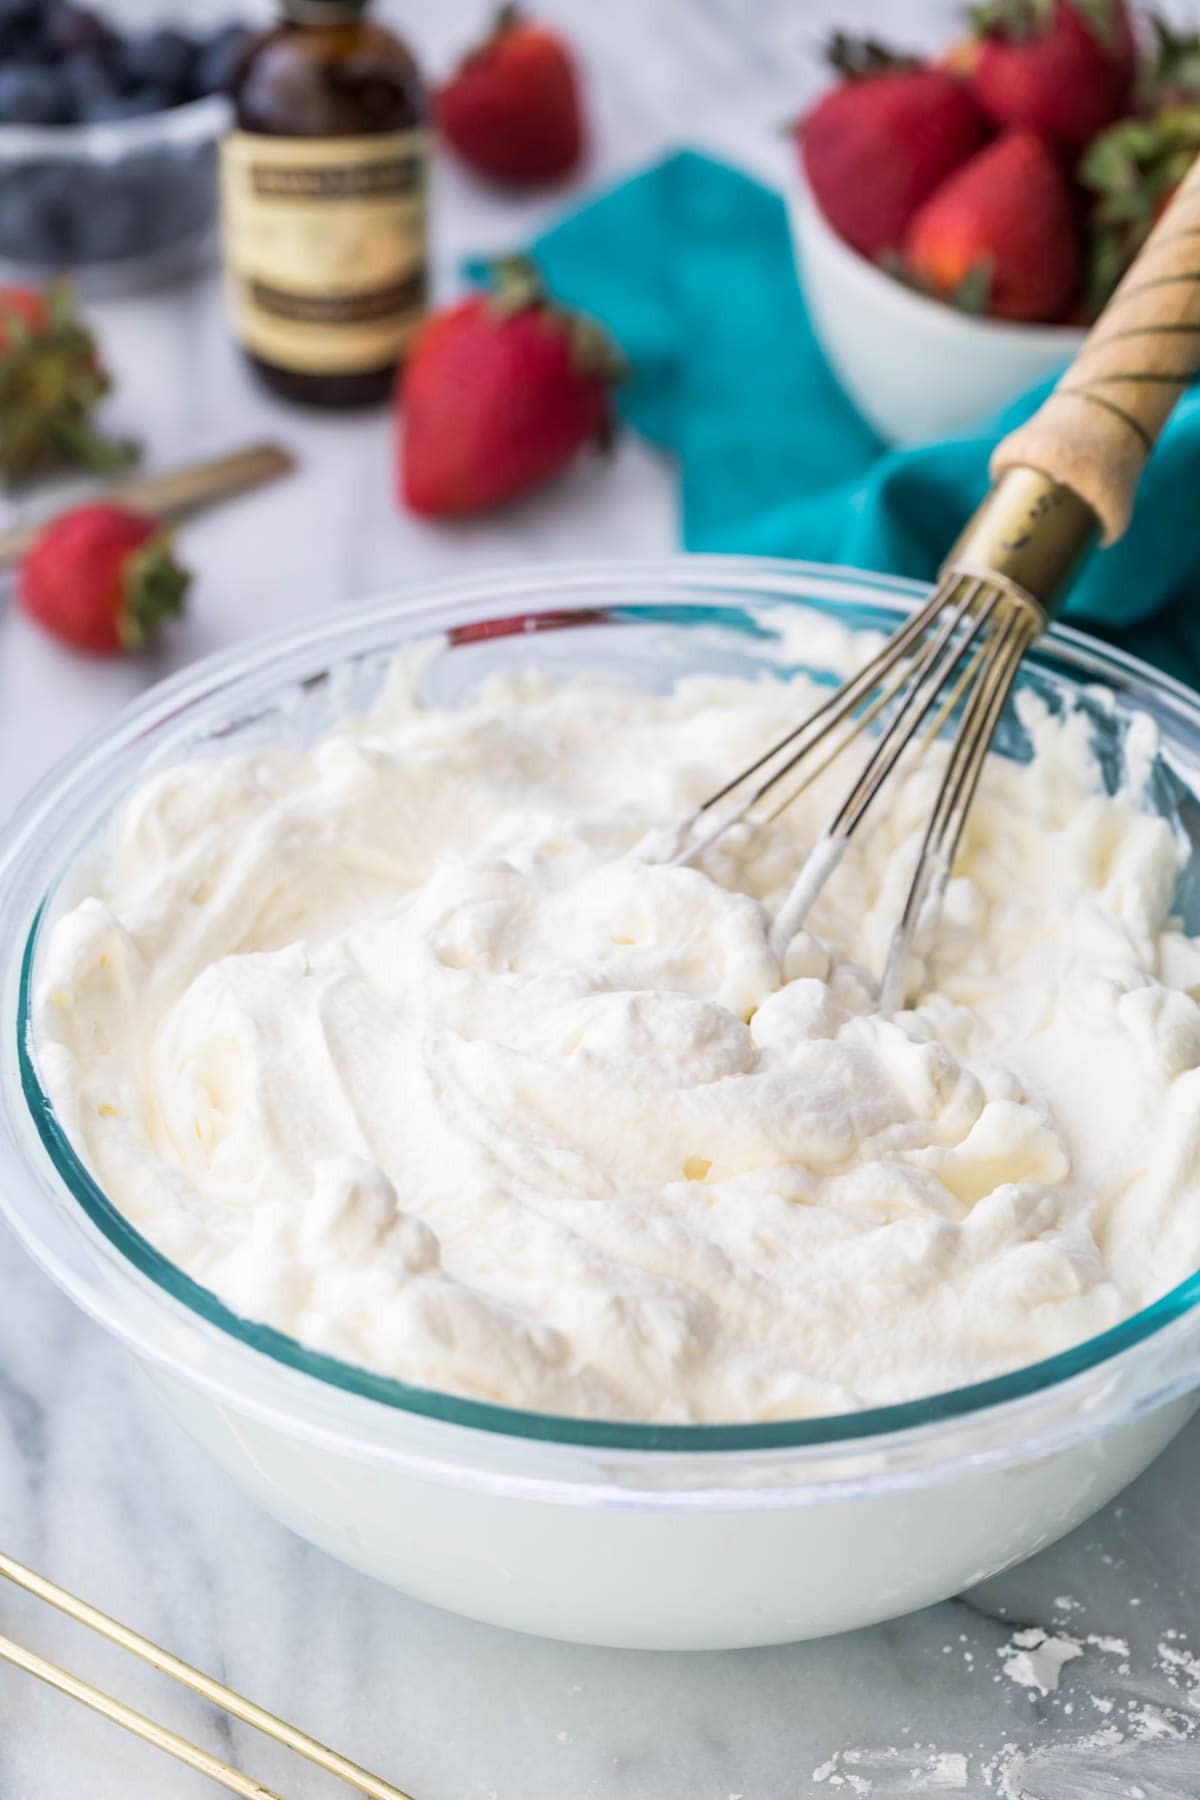 Overhead shot of a clear glass mixing bowl filled with whipped cream and a whisk.